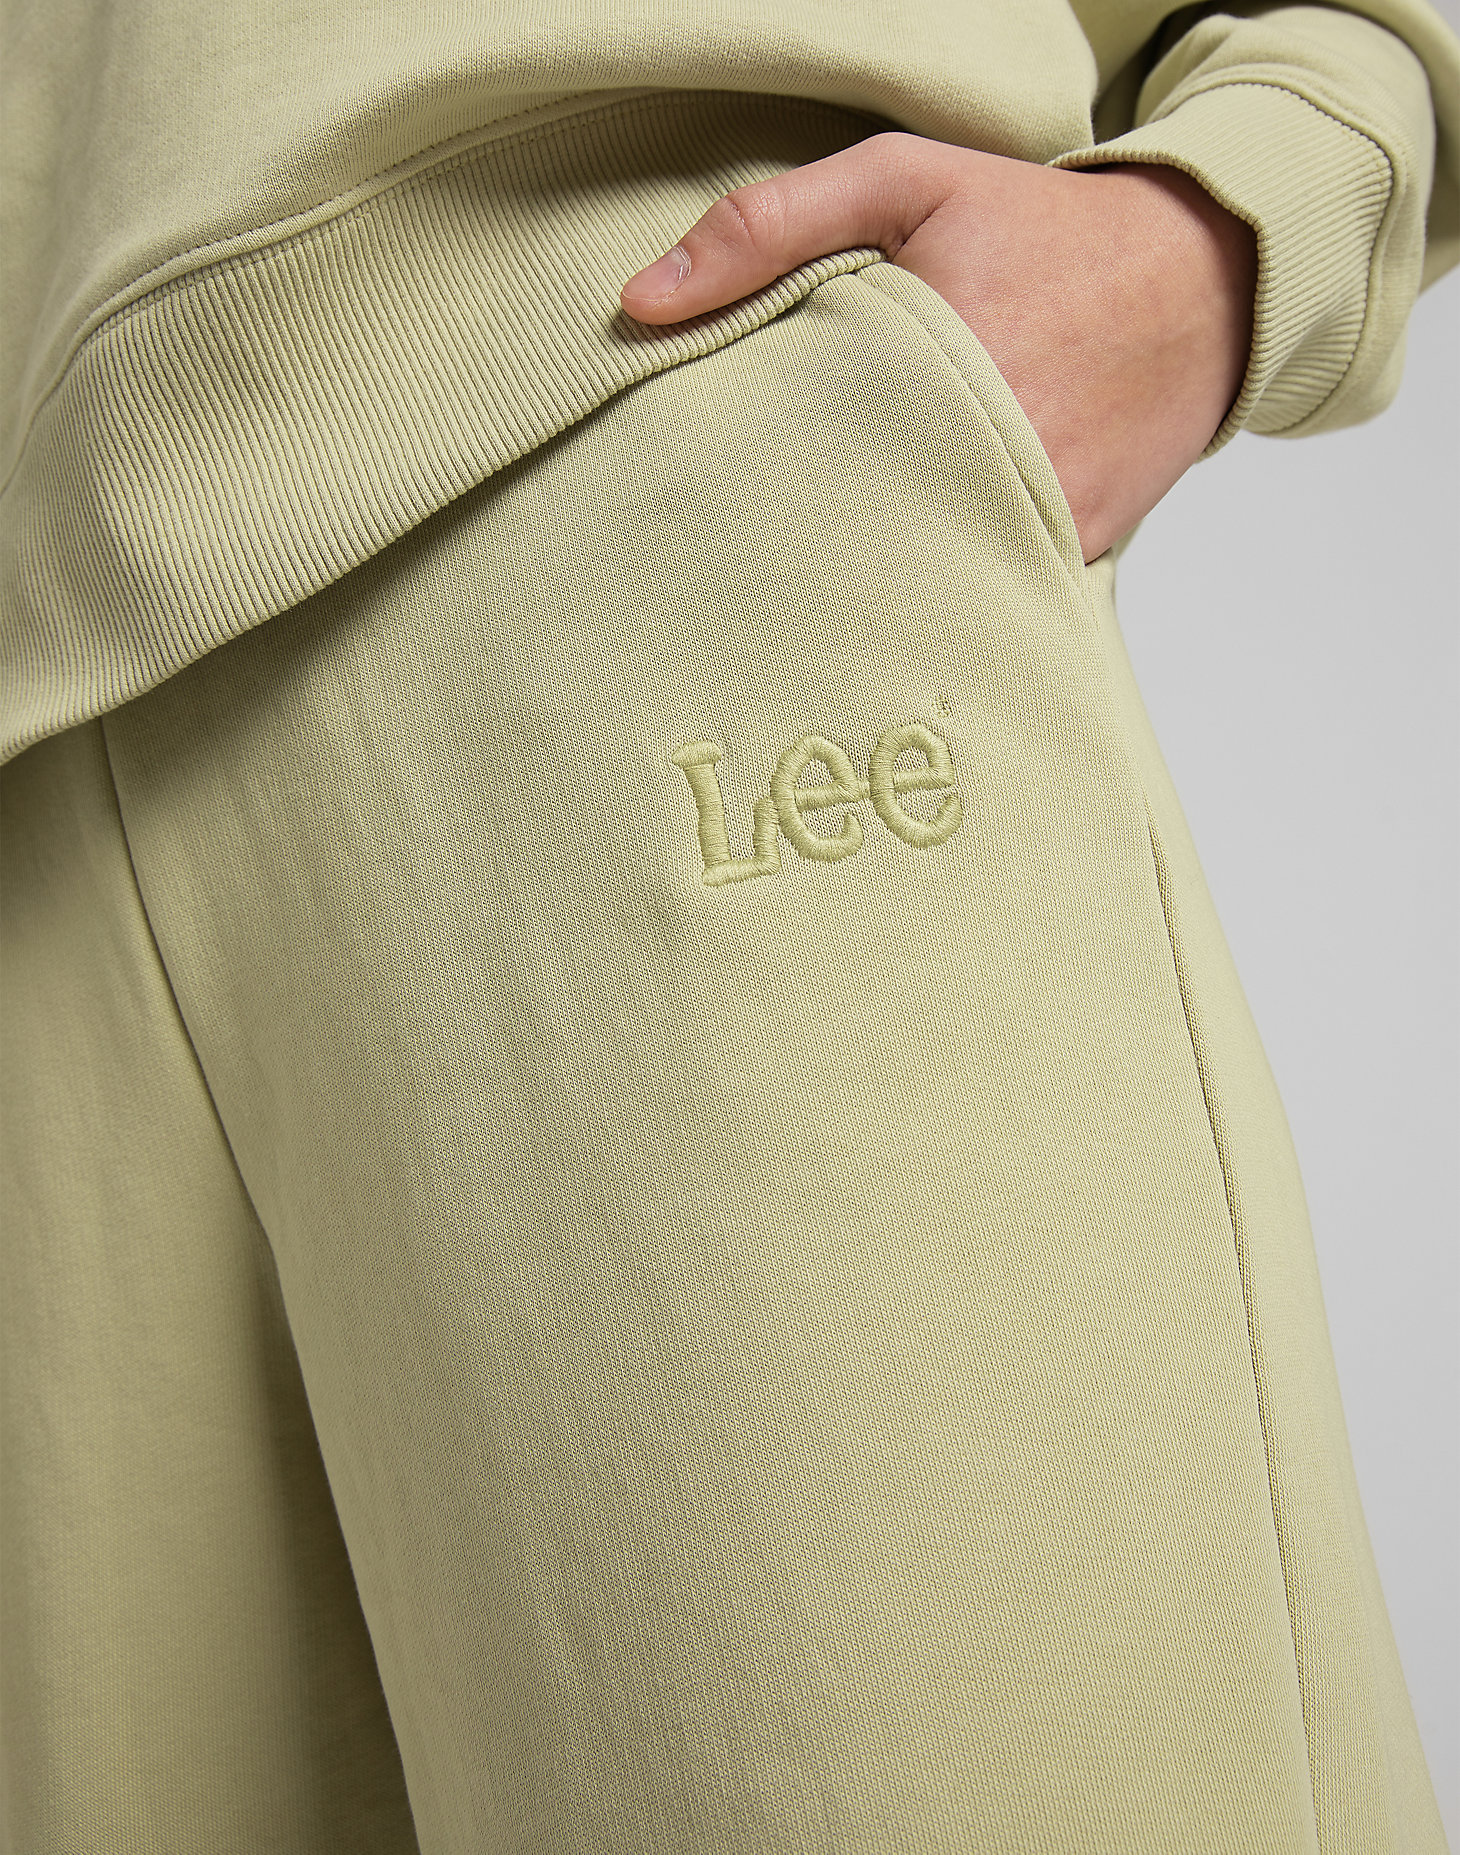 Relaxed Sweatpants in Pale Khaki alternative view 6